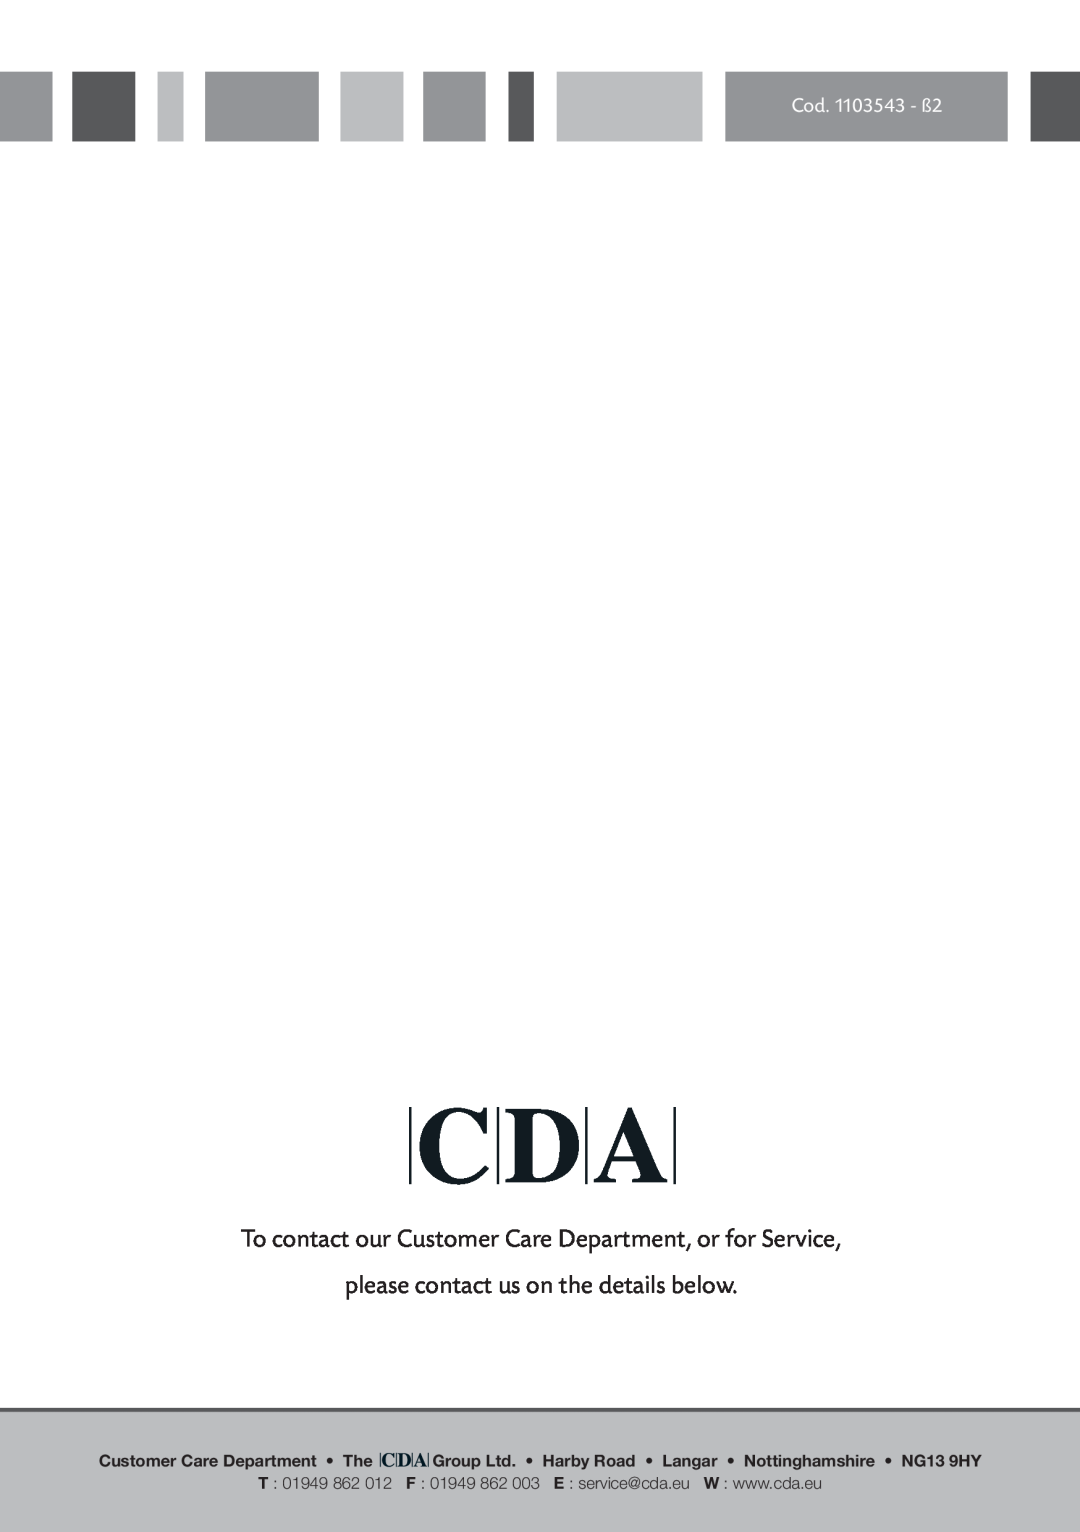 CDA DC930 manual To contact our Customer Care Department, or for Service, please contact us on the details below, T 01949 